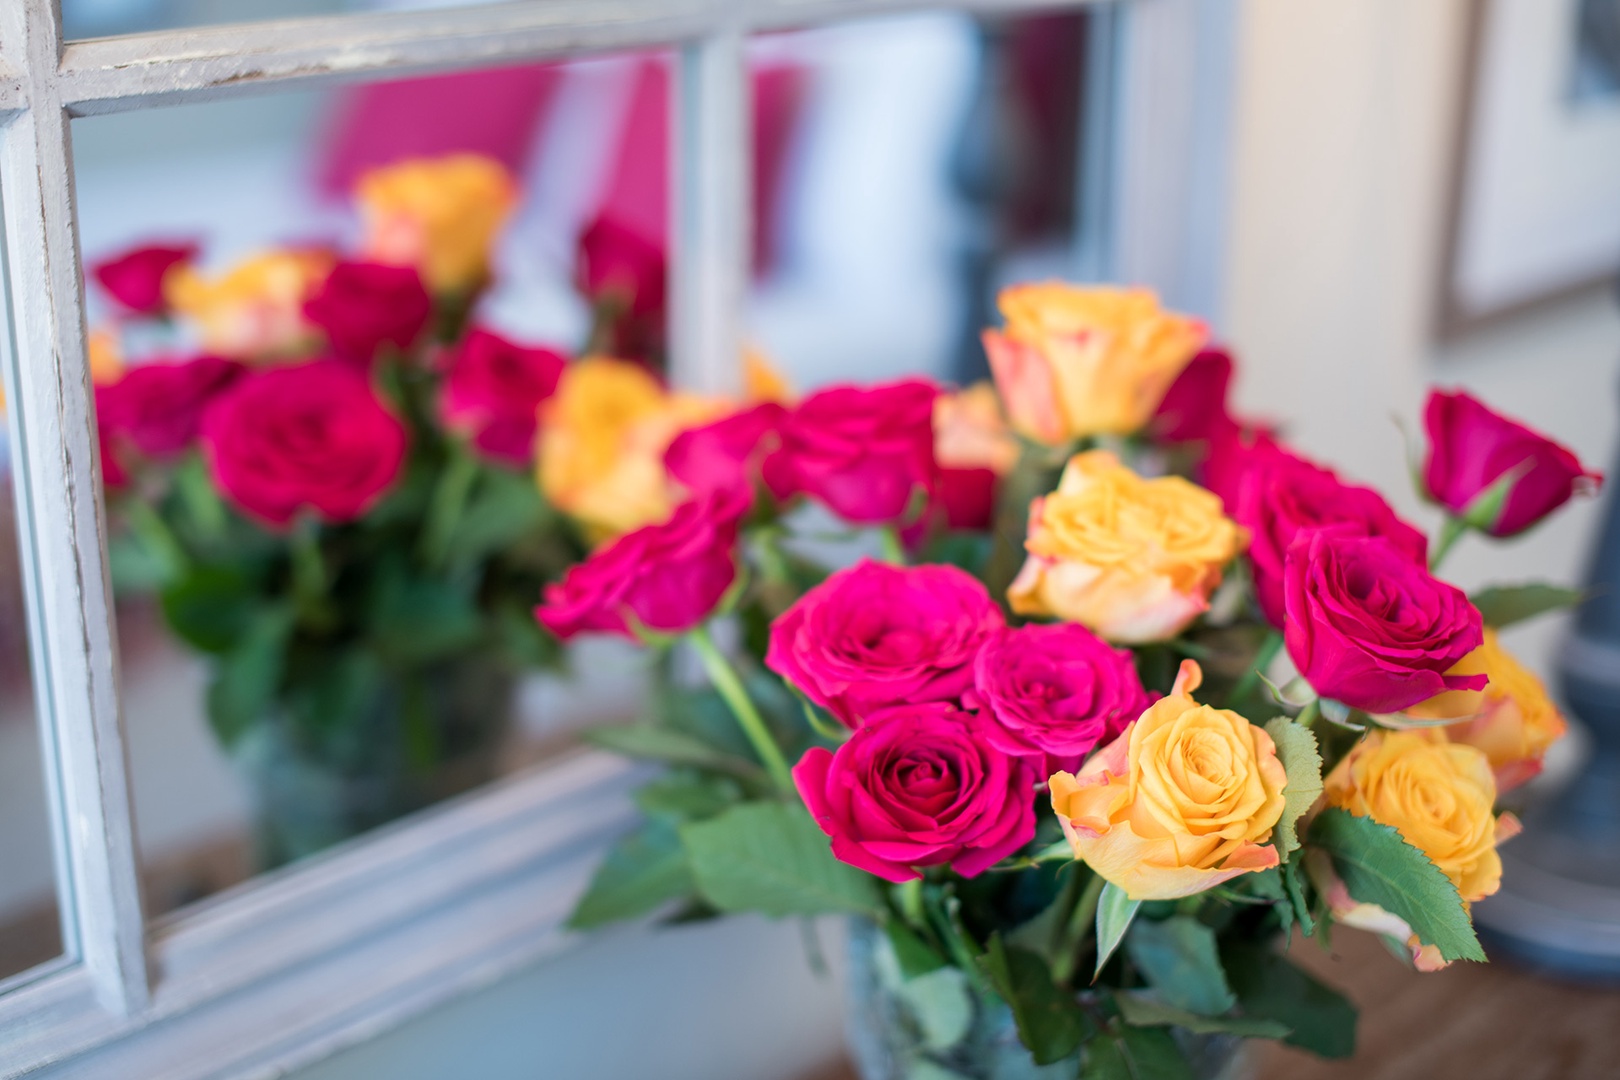 Pick up a bouquet of flowers from shops on Rue Cler.